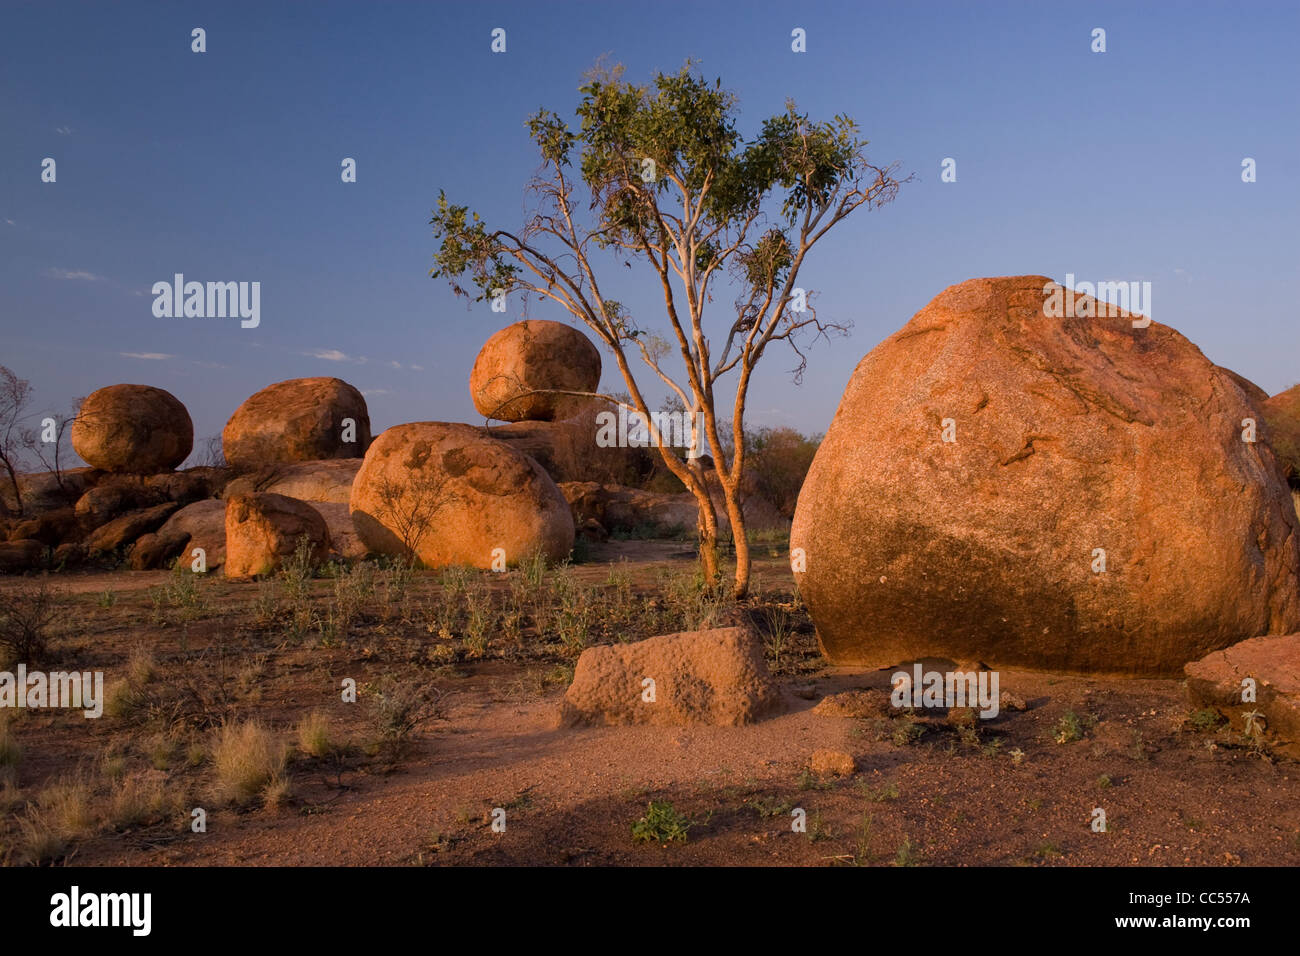 The Devil's Marbles at sunset in Australia's Northern Territory. Stock Photo